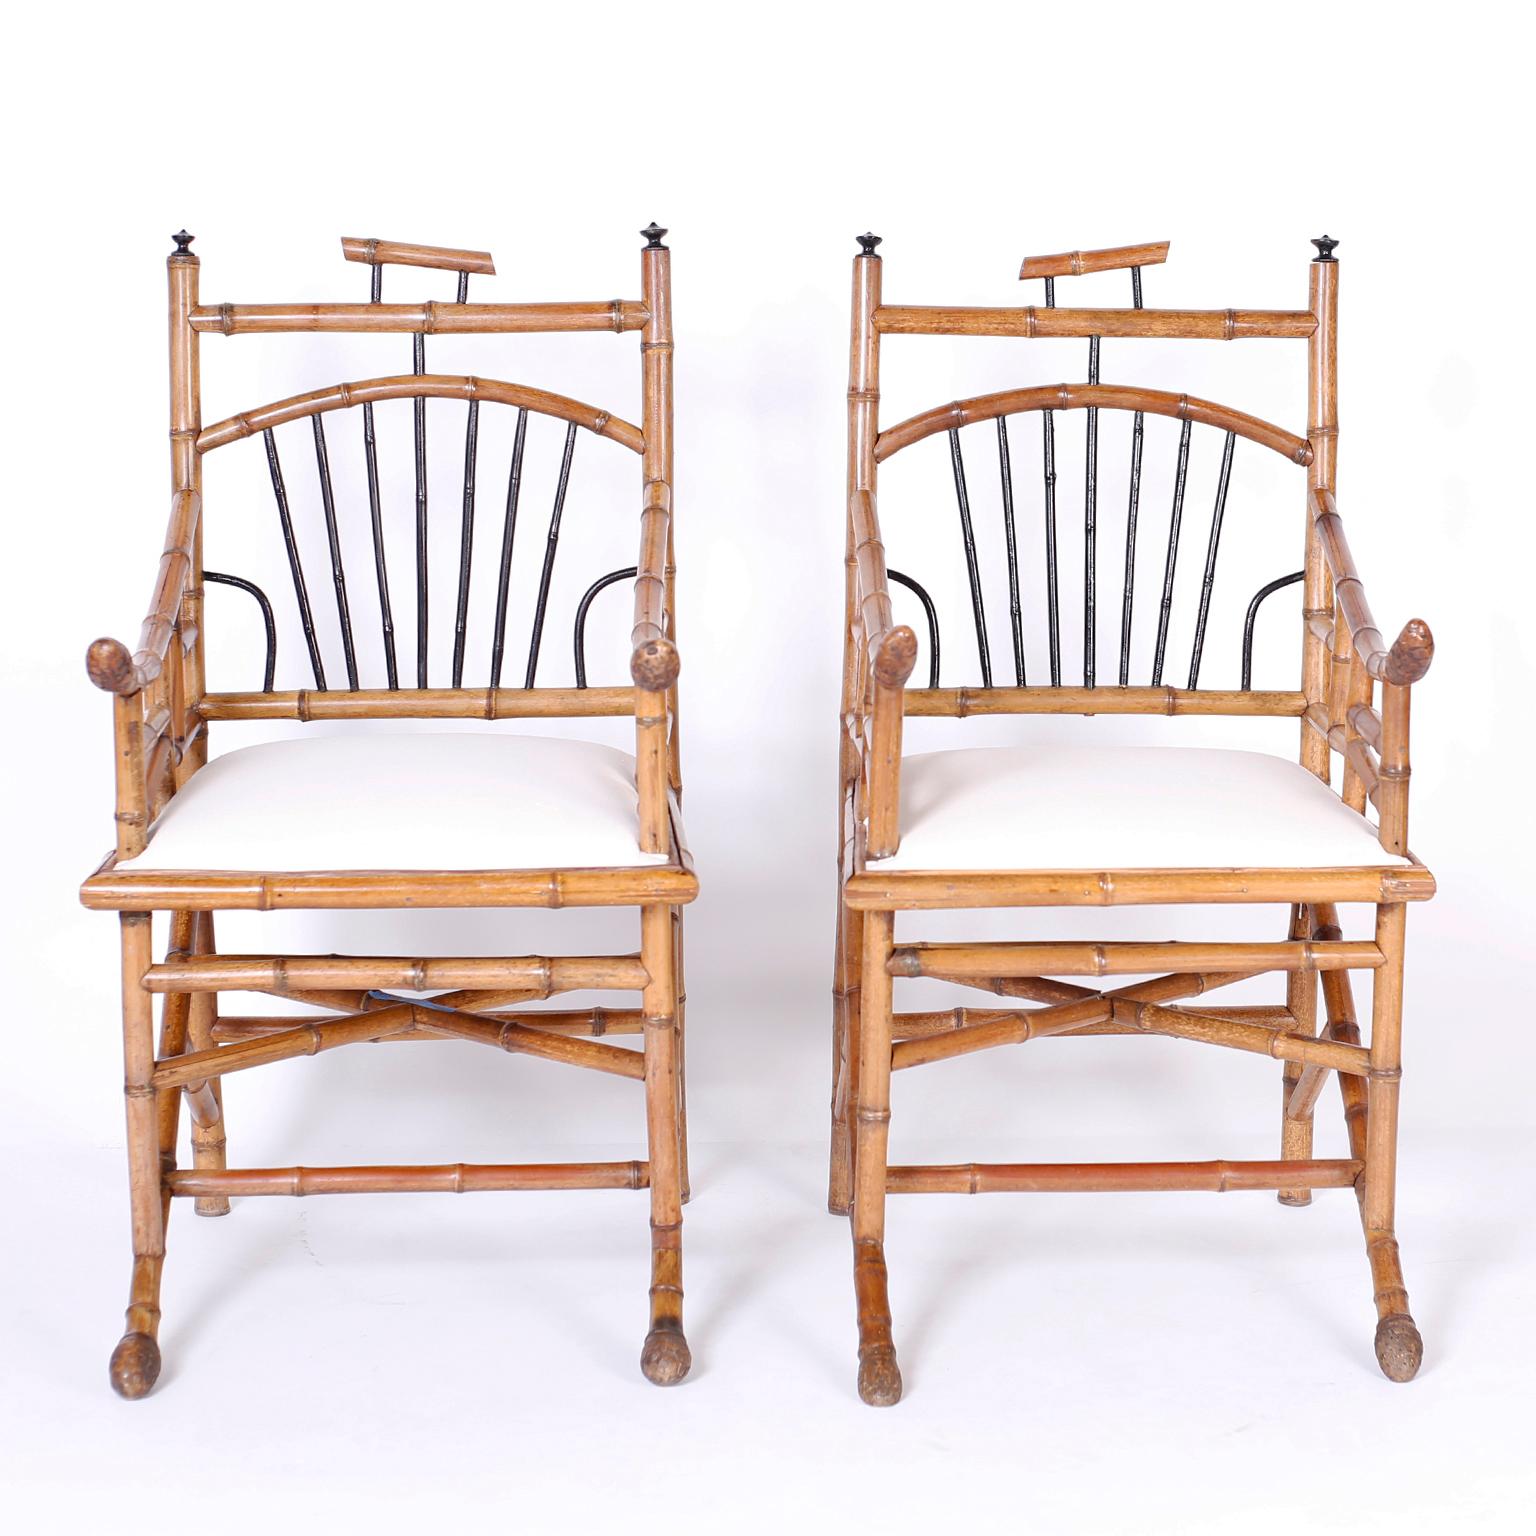 Unusual pair of Asian modern armchairs with Japanese influence crafted in bamboo and featuring bent and ebonized bamboo with roots on the arms and front feet.